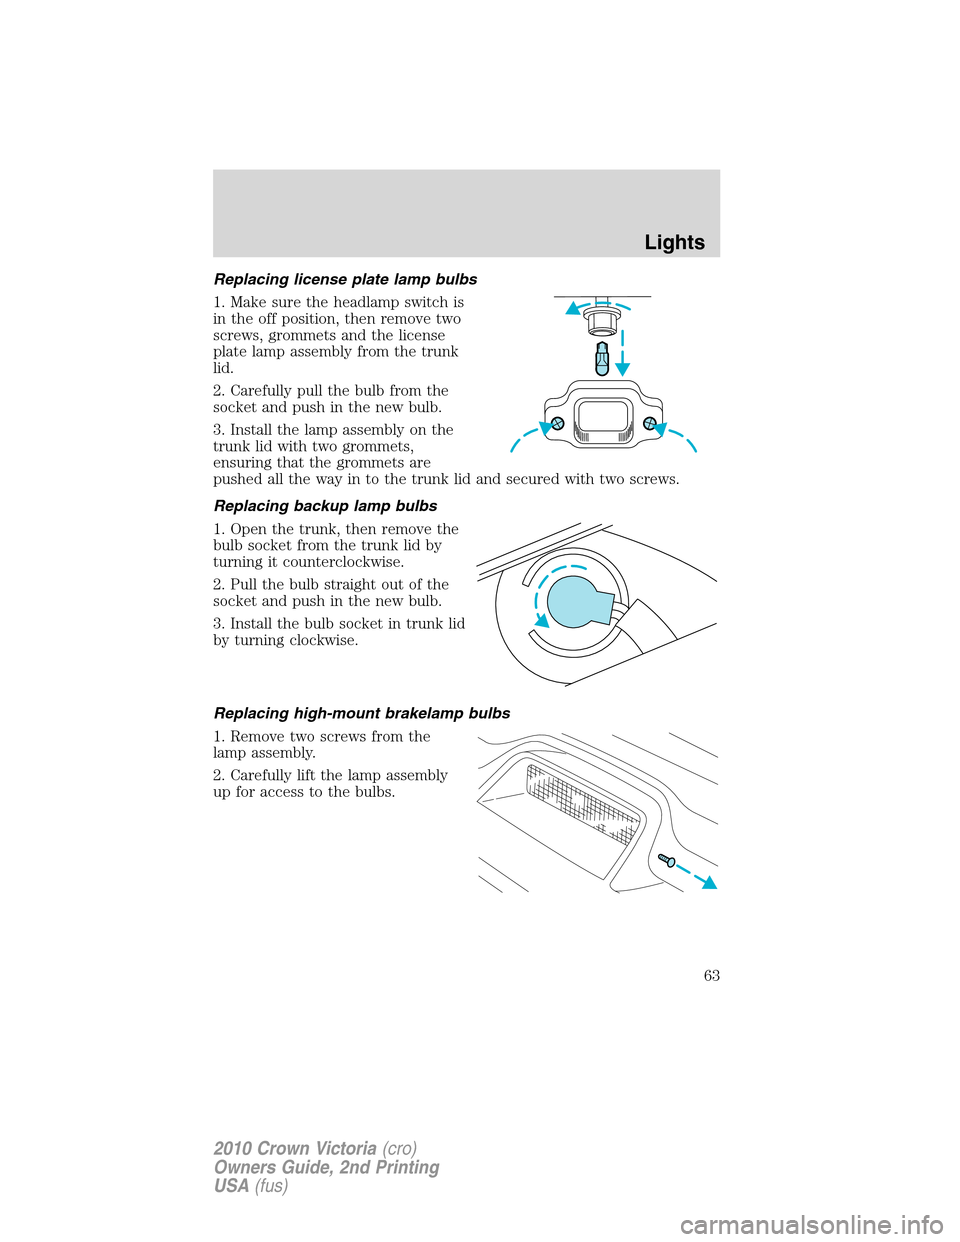 Mercury Grand Marquis 2010  s Owners Guide Replacing license plate lamp bulbs
1. Make sure the headlamp switch is
in the off position, then remove two
screws, grommets and the license
plate lamp assembly from the trunk
lid.
2. Carefully pull t